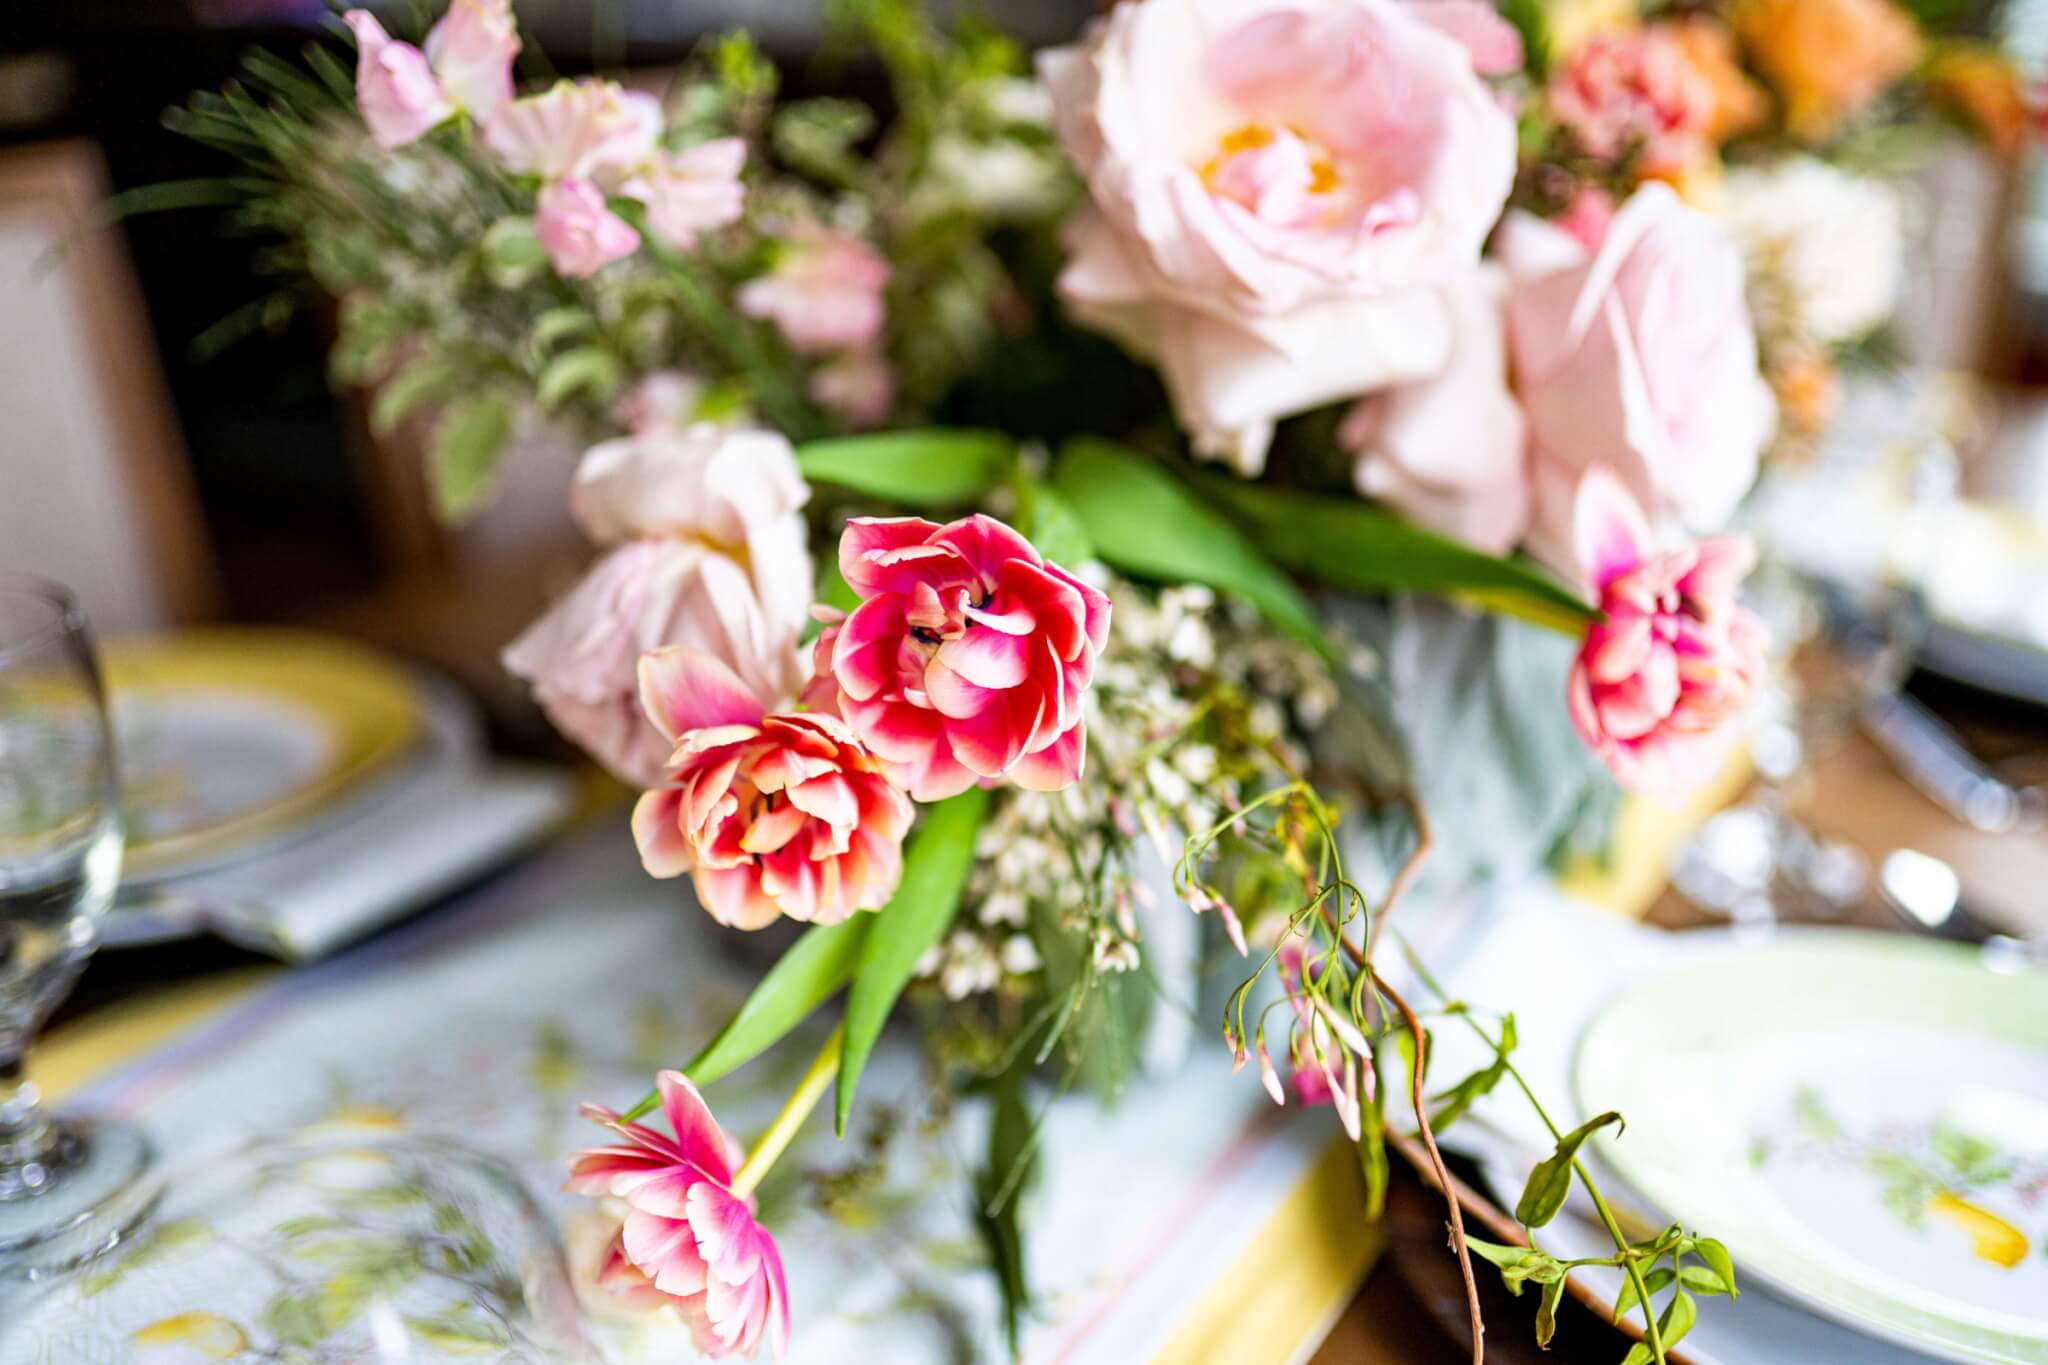 roses and tulips as tablesetting decoration